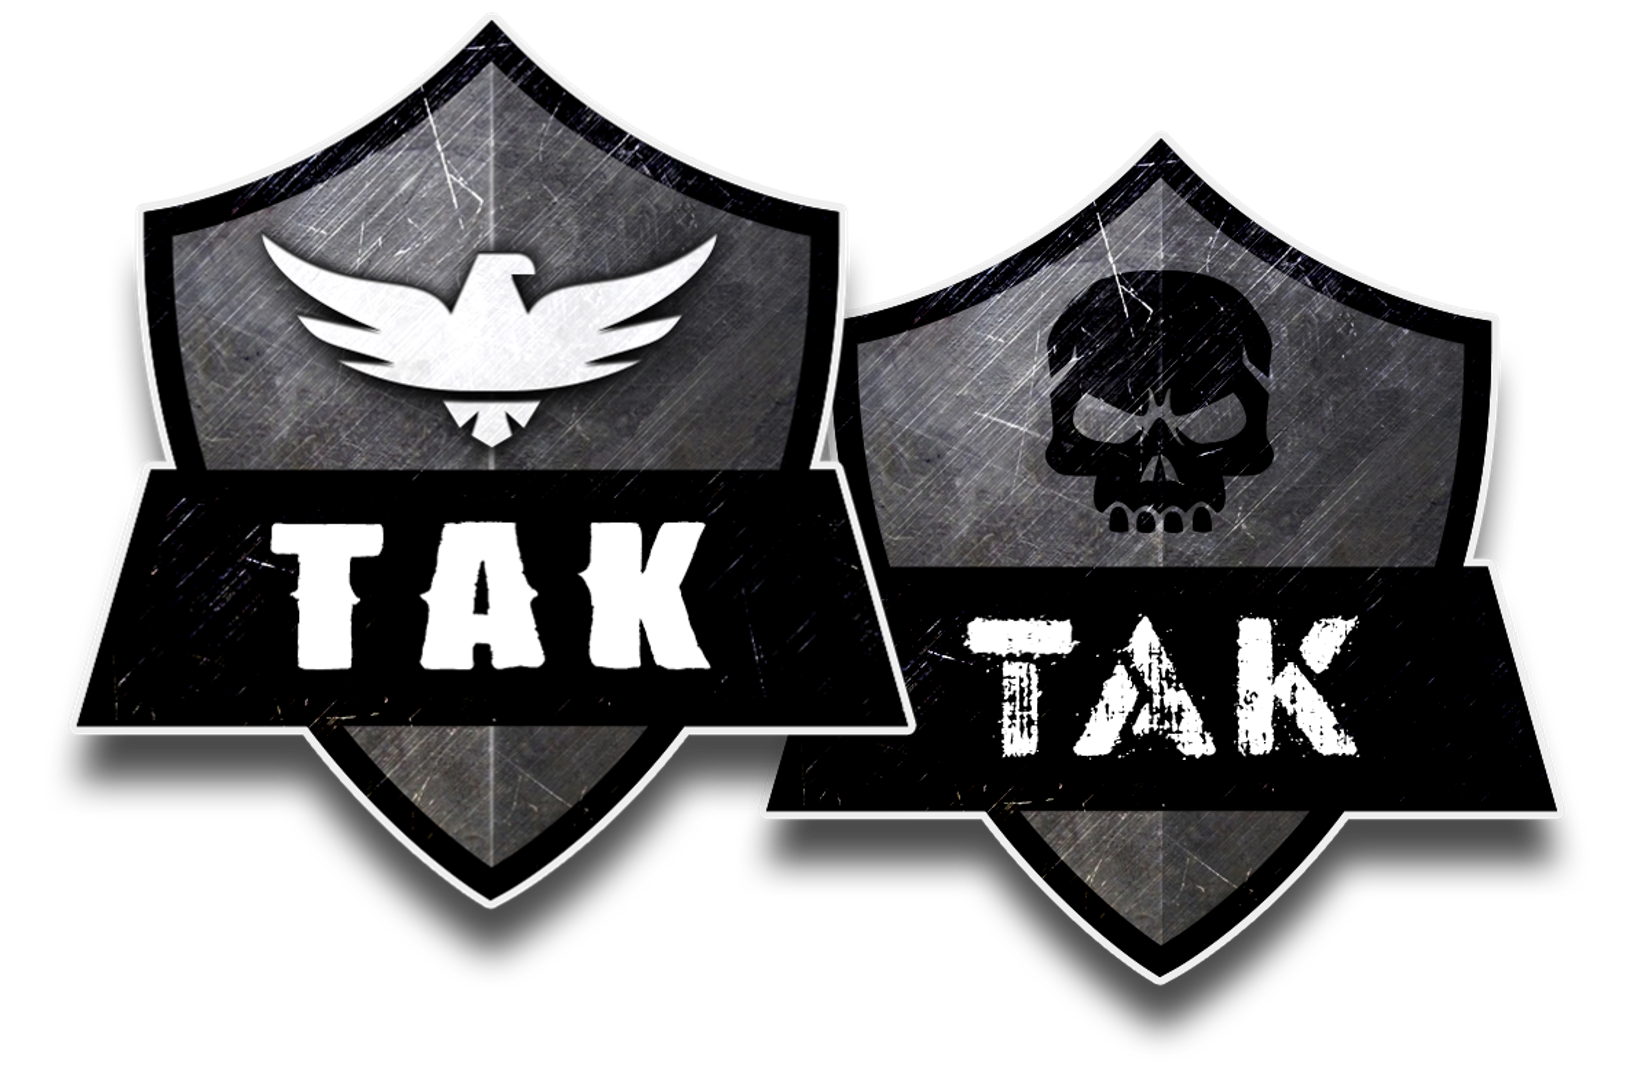 What is TAK?